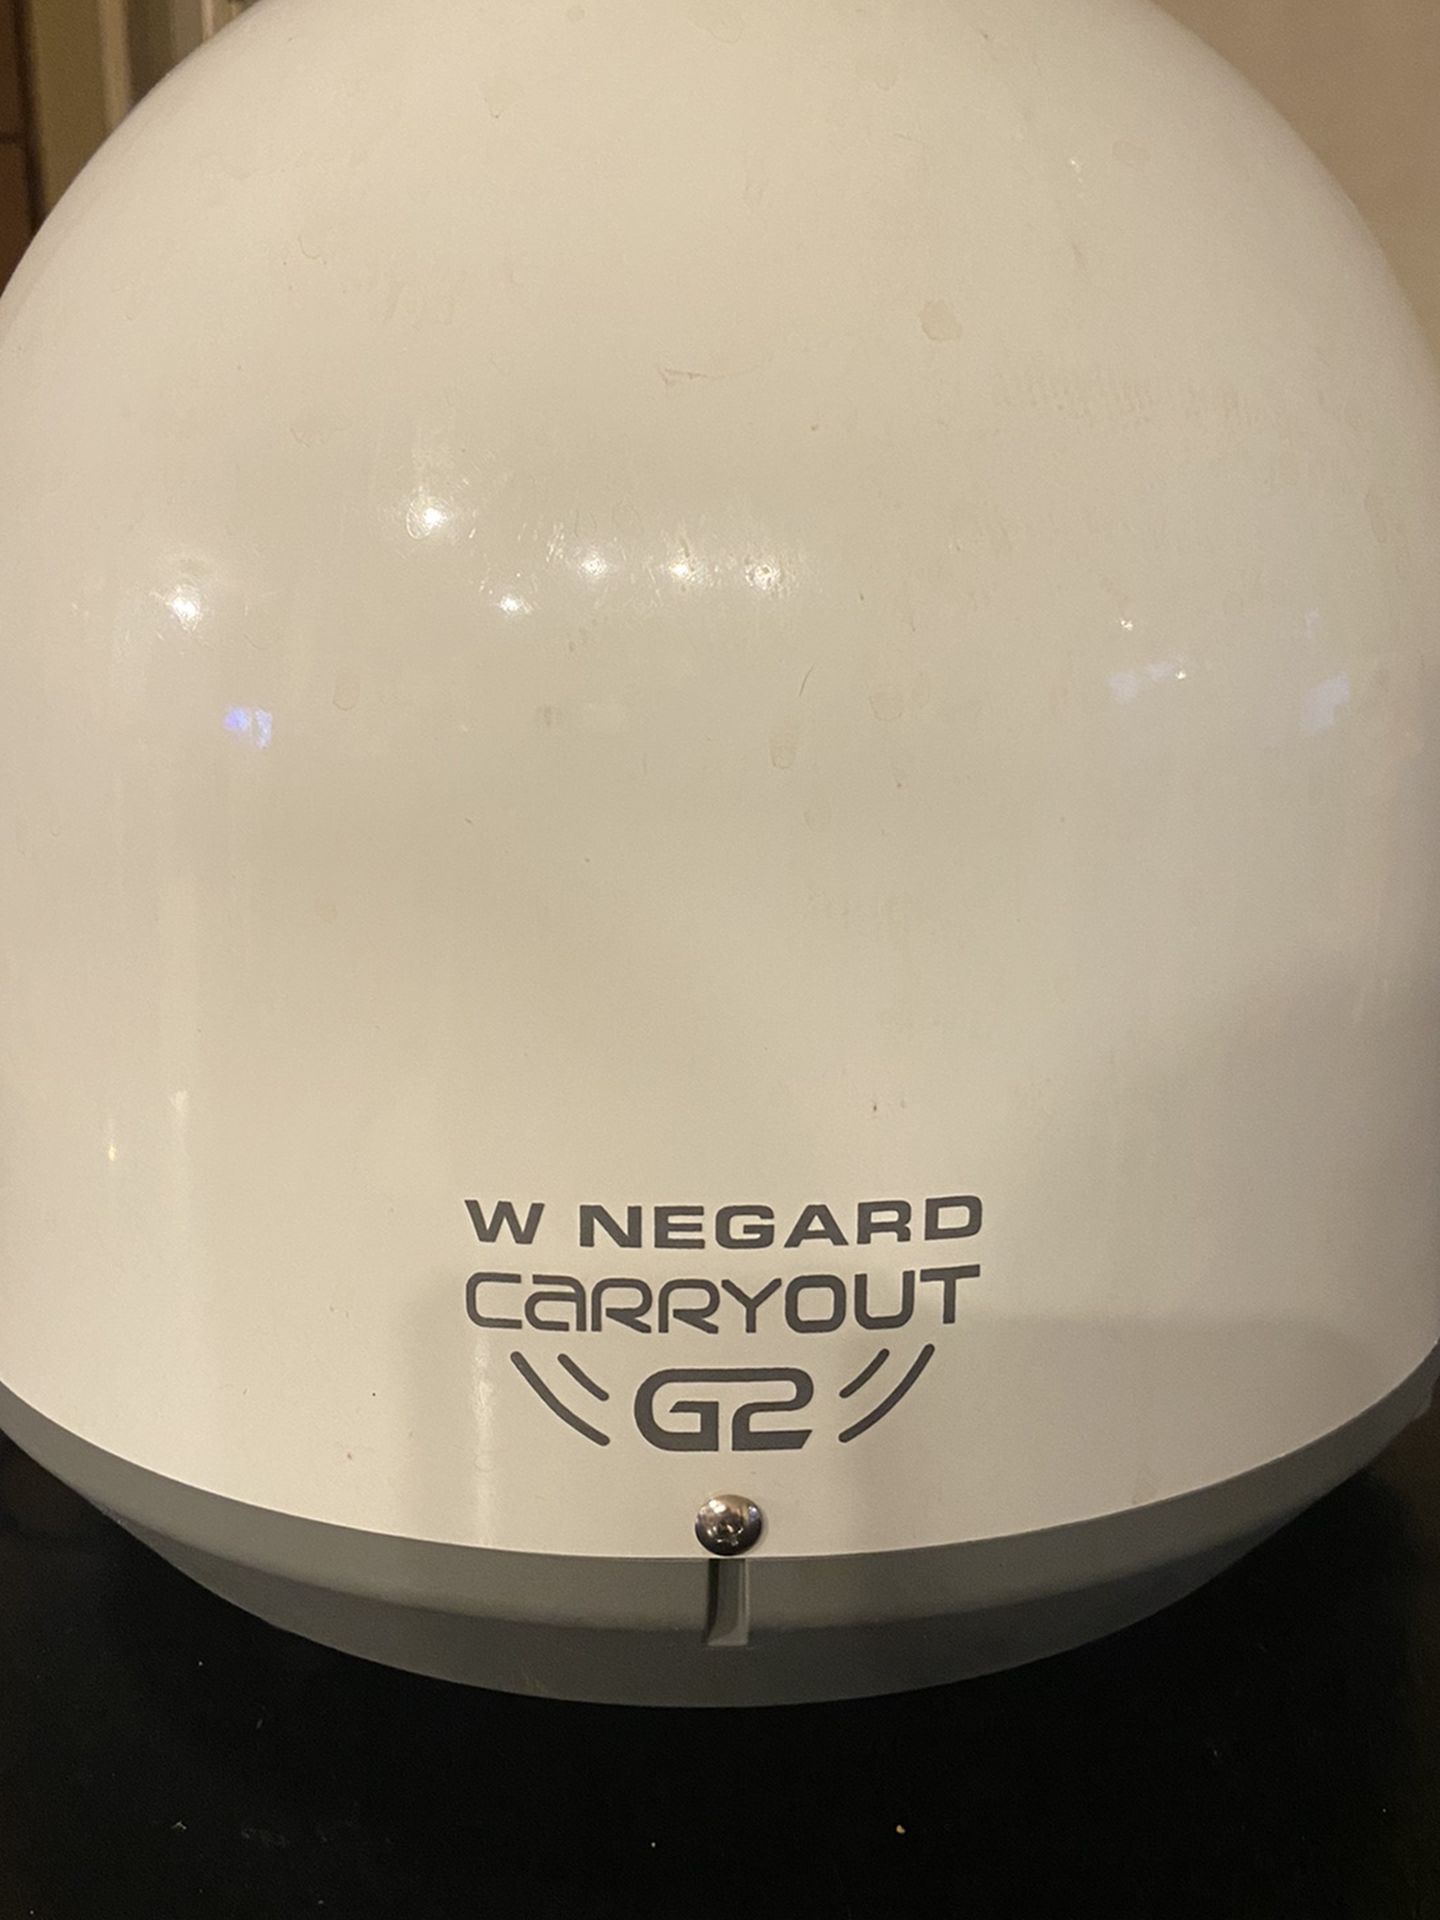 Winegard Carryout G2